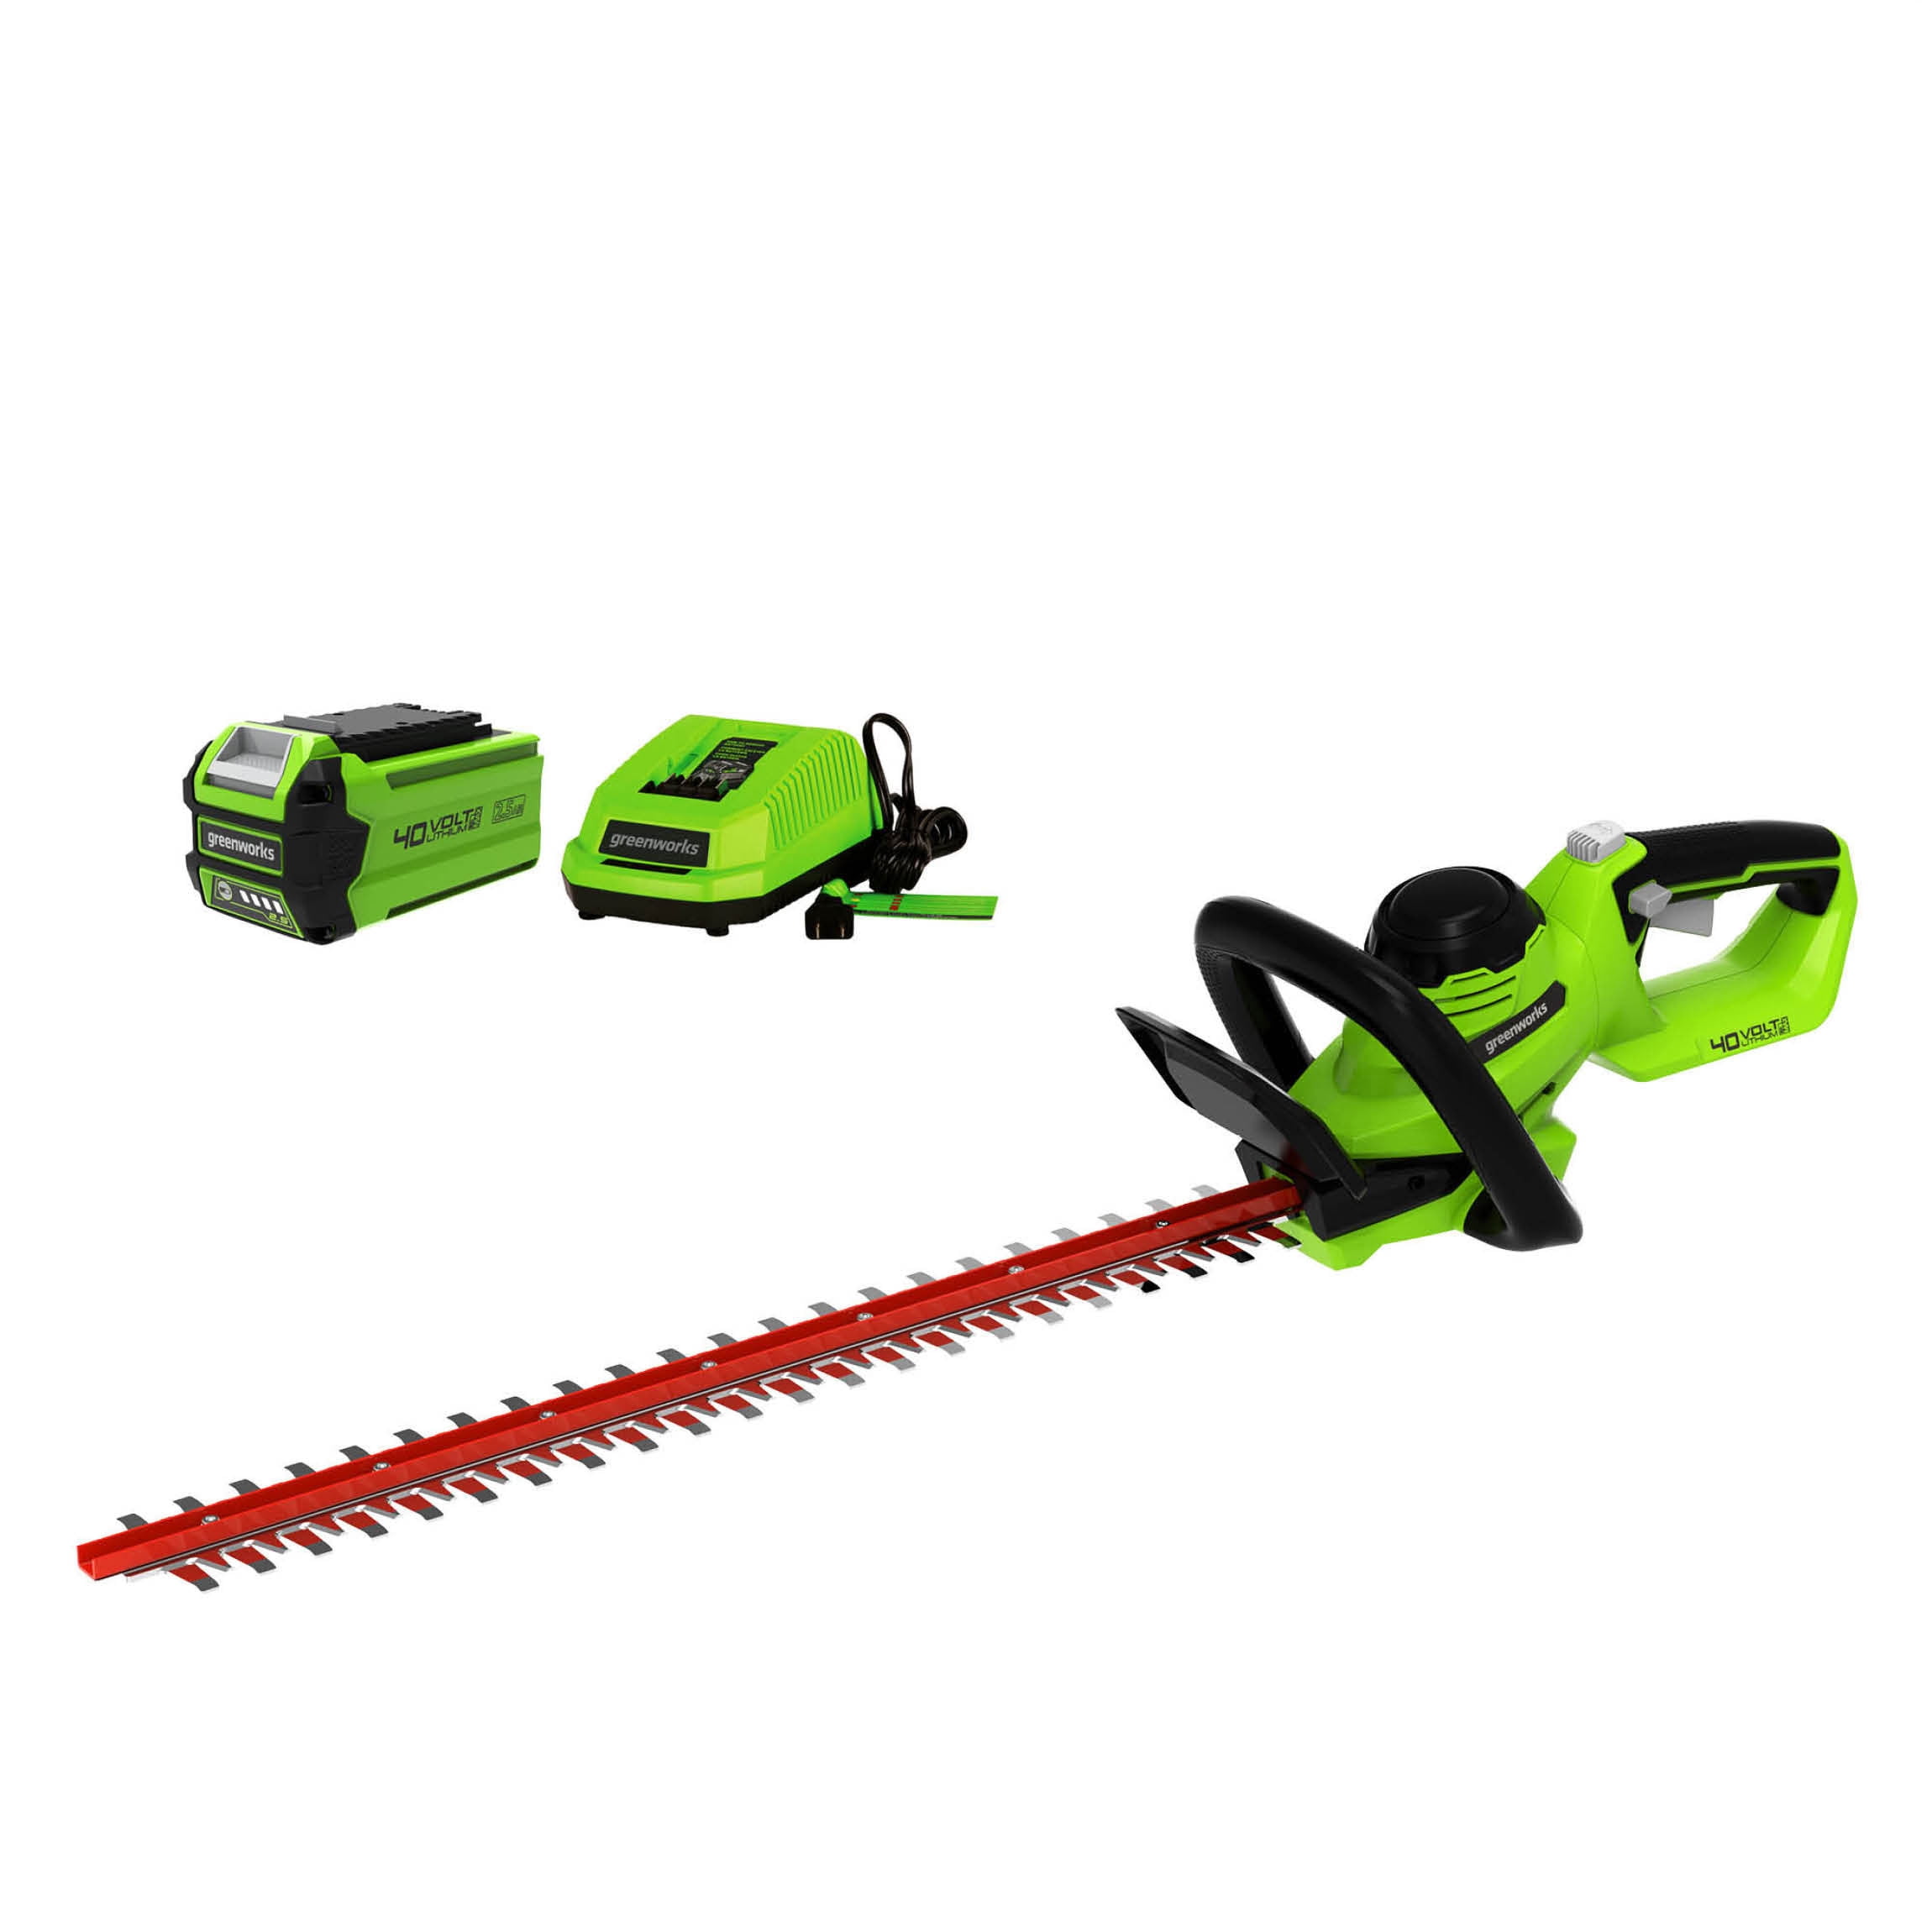 Greenworks 40V 24-inch Hedge Trimmer with 2.5 Ah Battery and Quick .